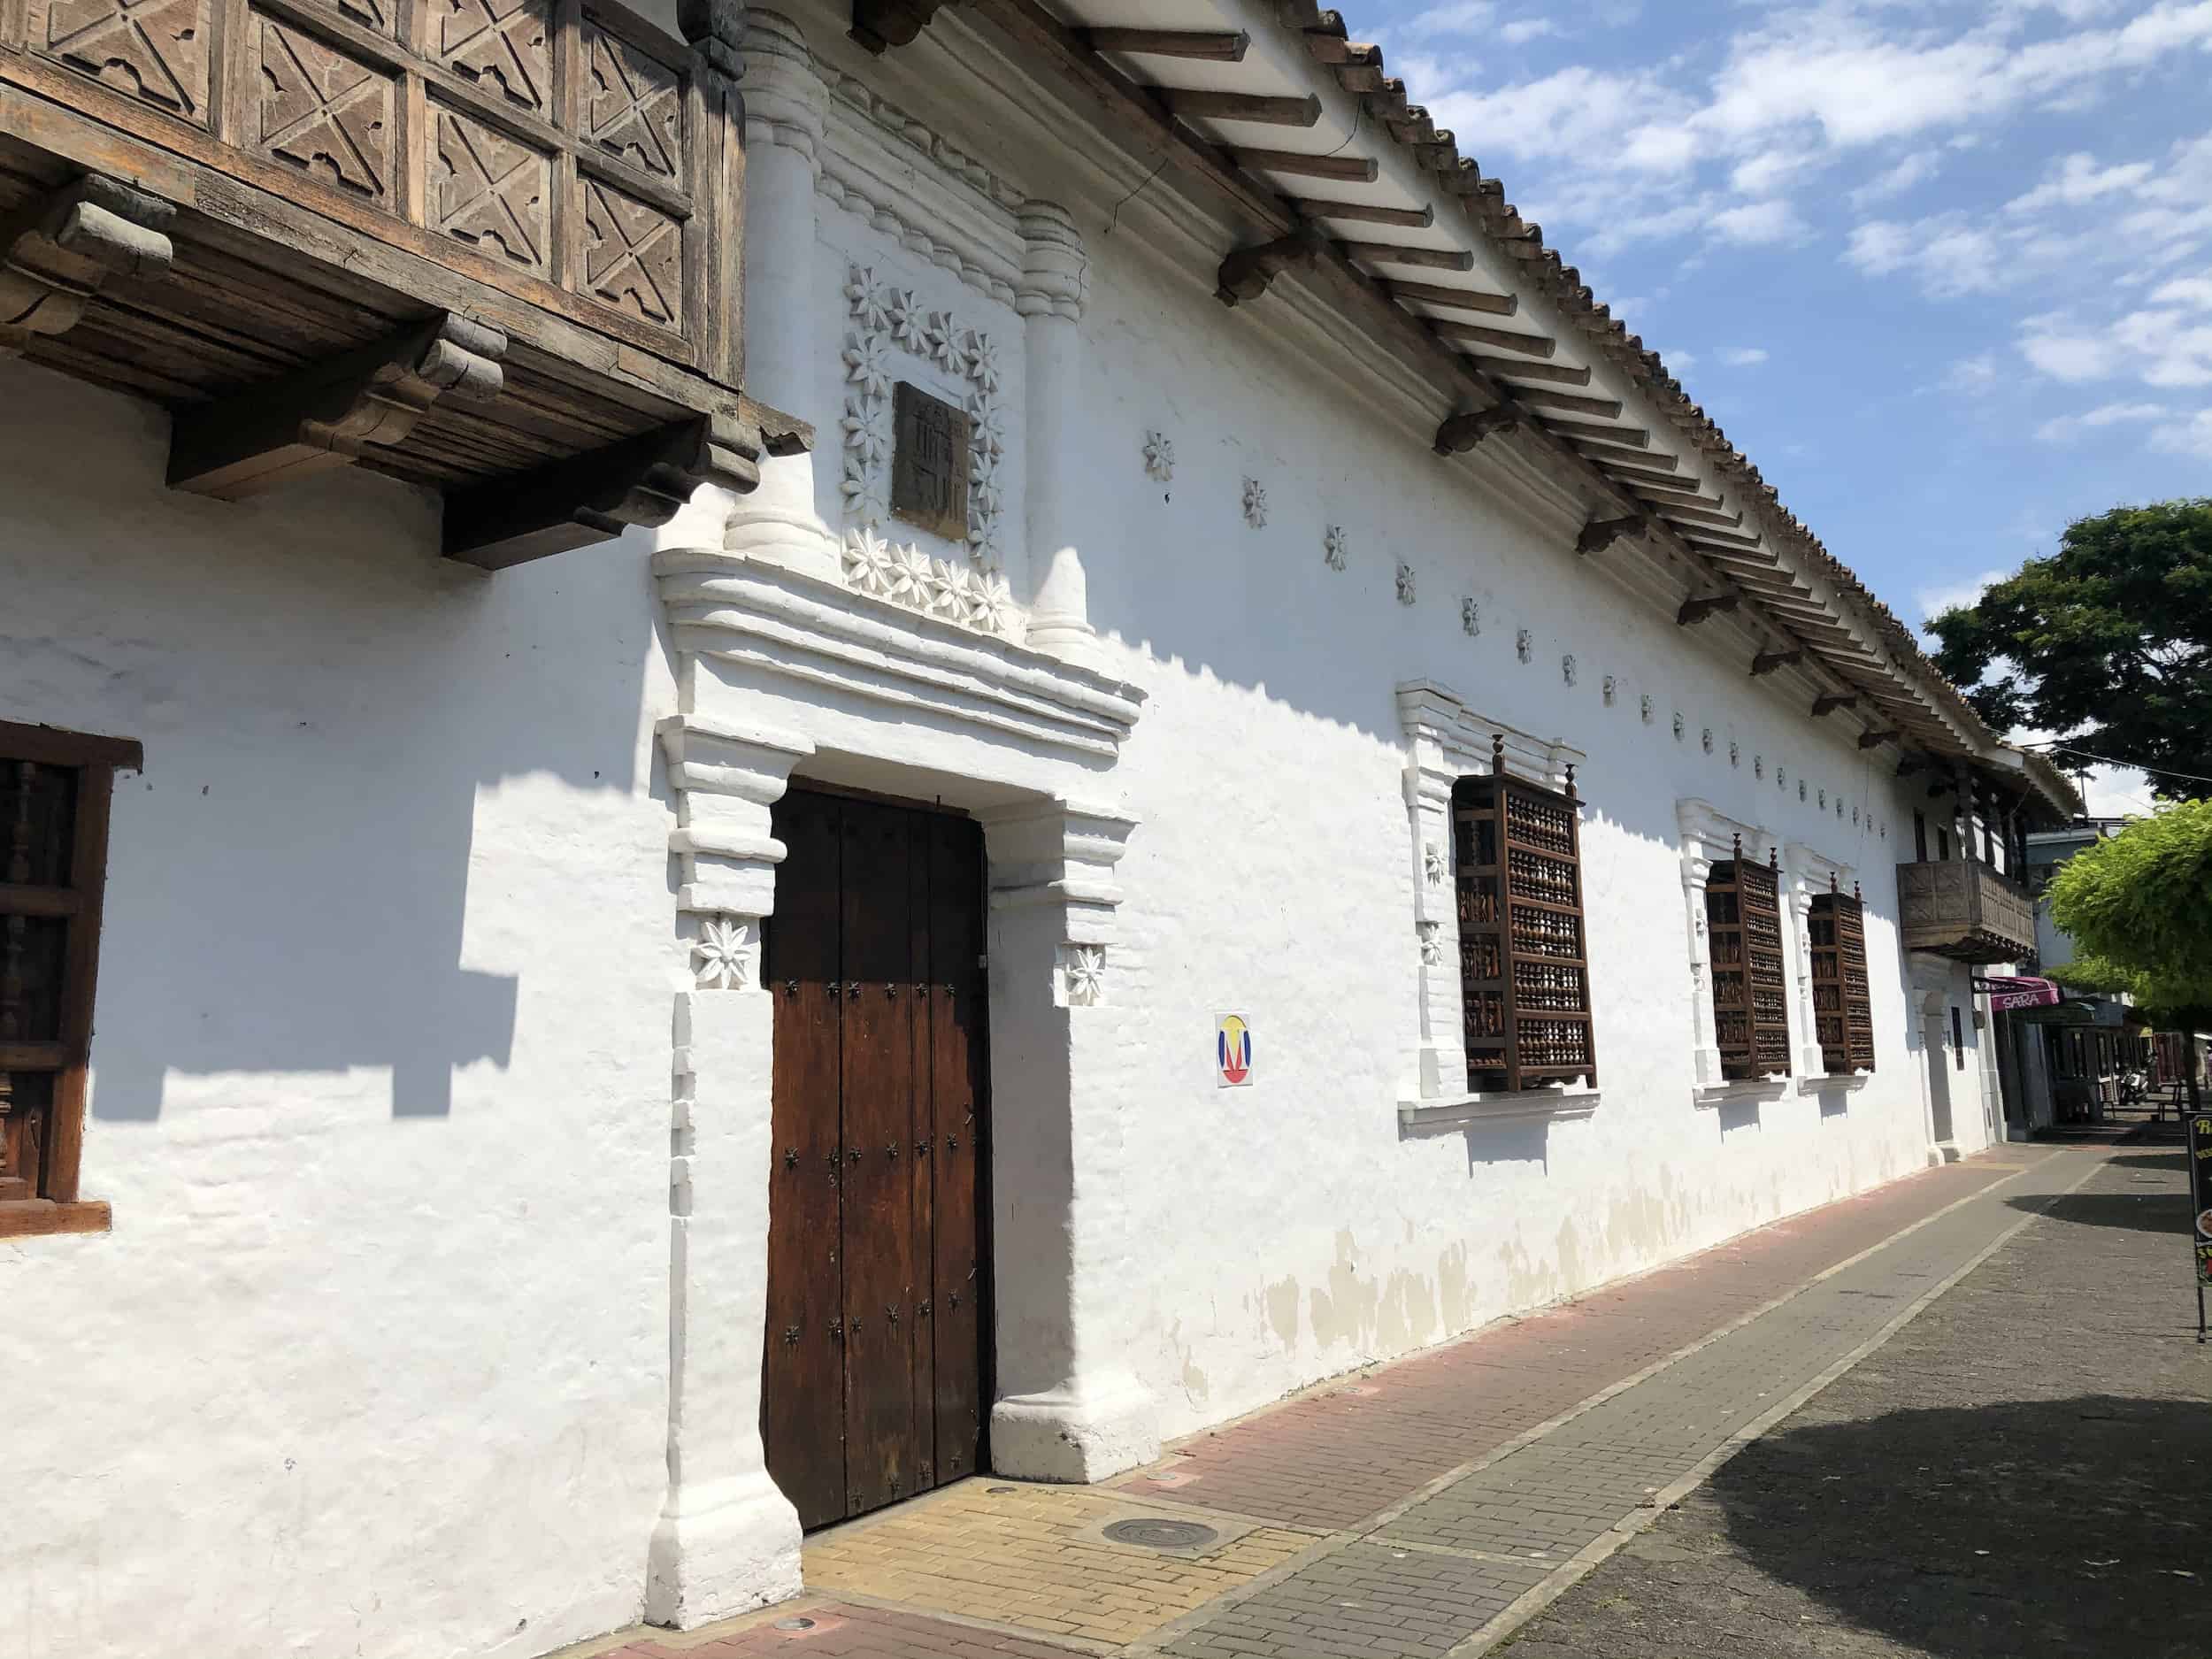 House of the Viceroy in Cartago, Valle del Cauca, Colombia